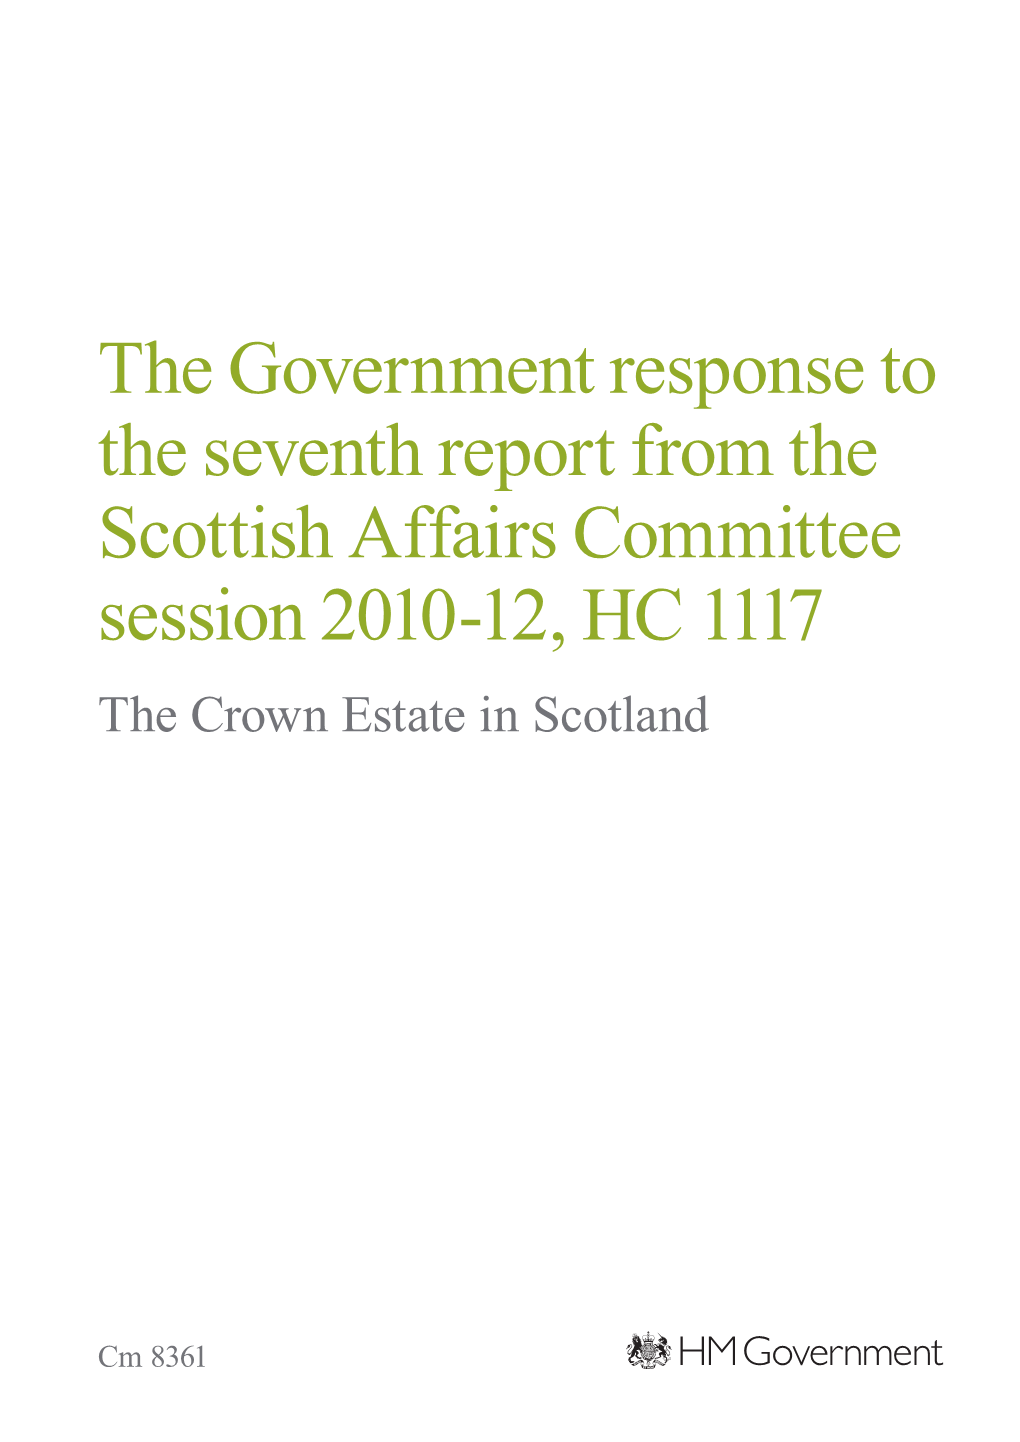 The Government Response to the Seventh Report from the Scottish Affairs Committee Session 2010-12, HC 1117 the Crown Estate in Scotland